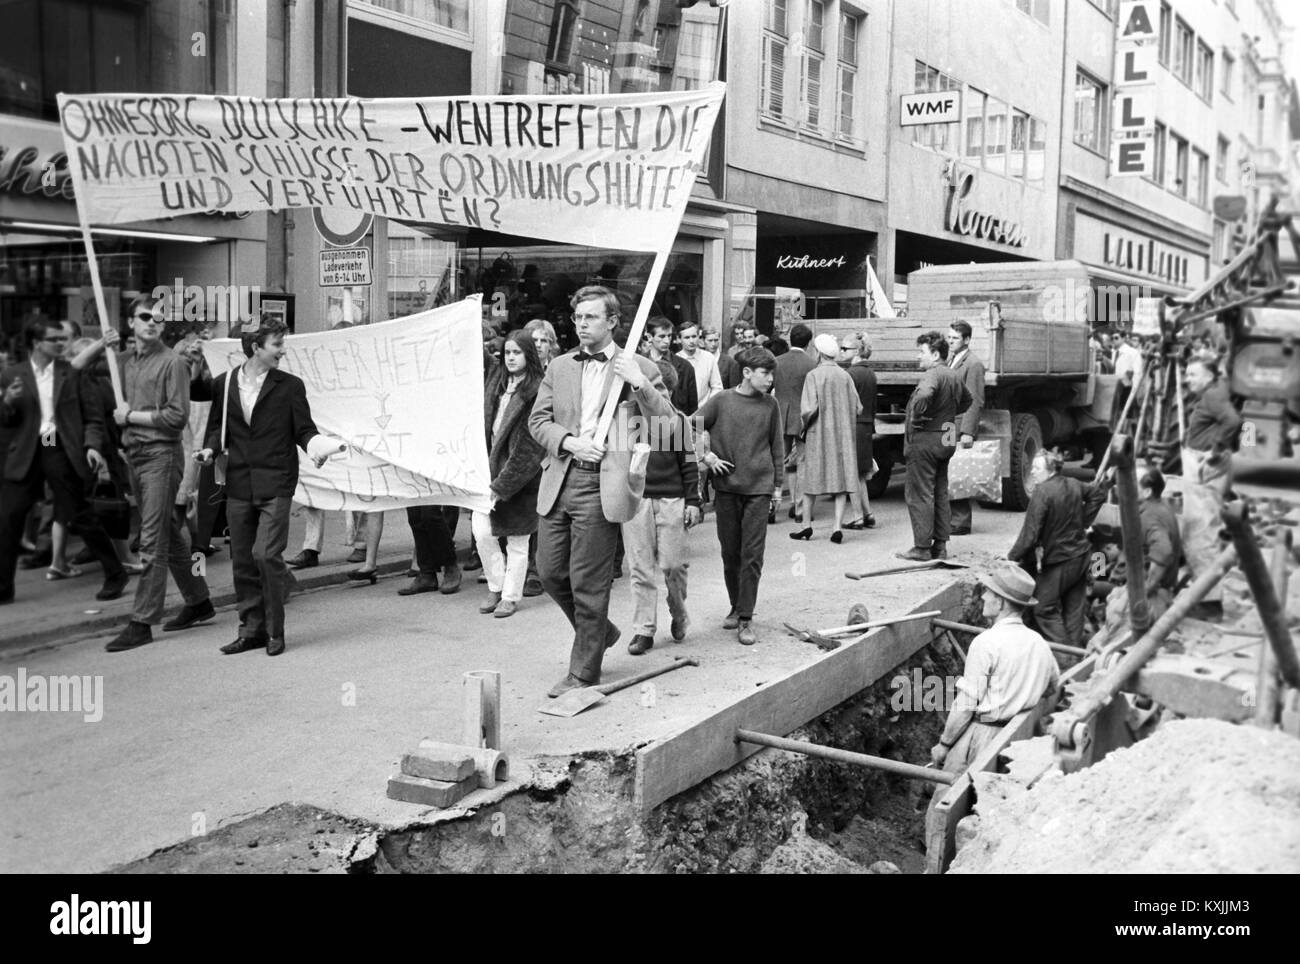 Students demonstrate on 16 April 1968 in Bonn after the attempted assassination of Rudi Dutschke (11 April 1968 in Berlin) against Springer press. | usage worldwide Stock Photo